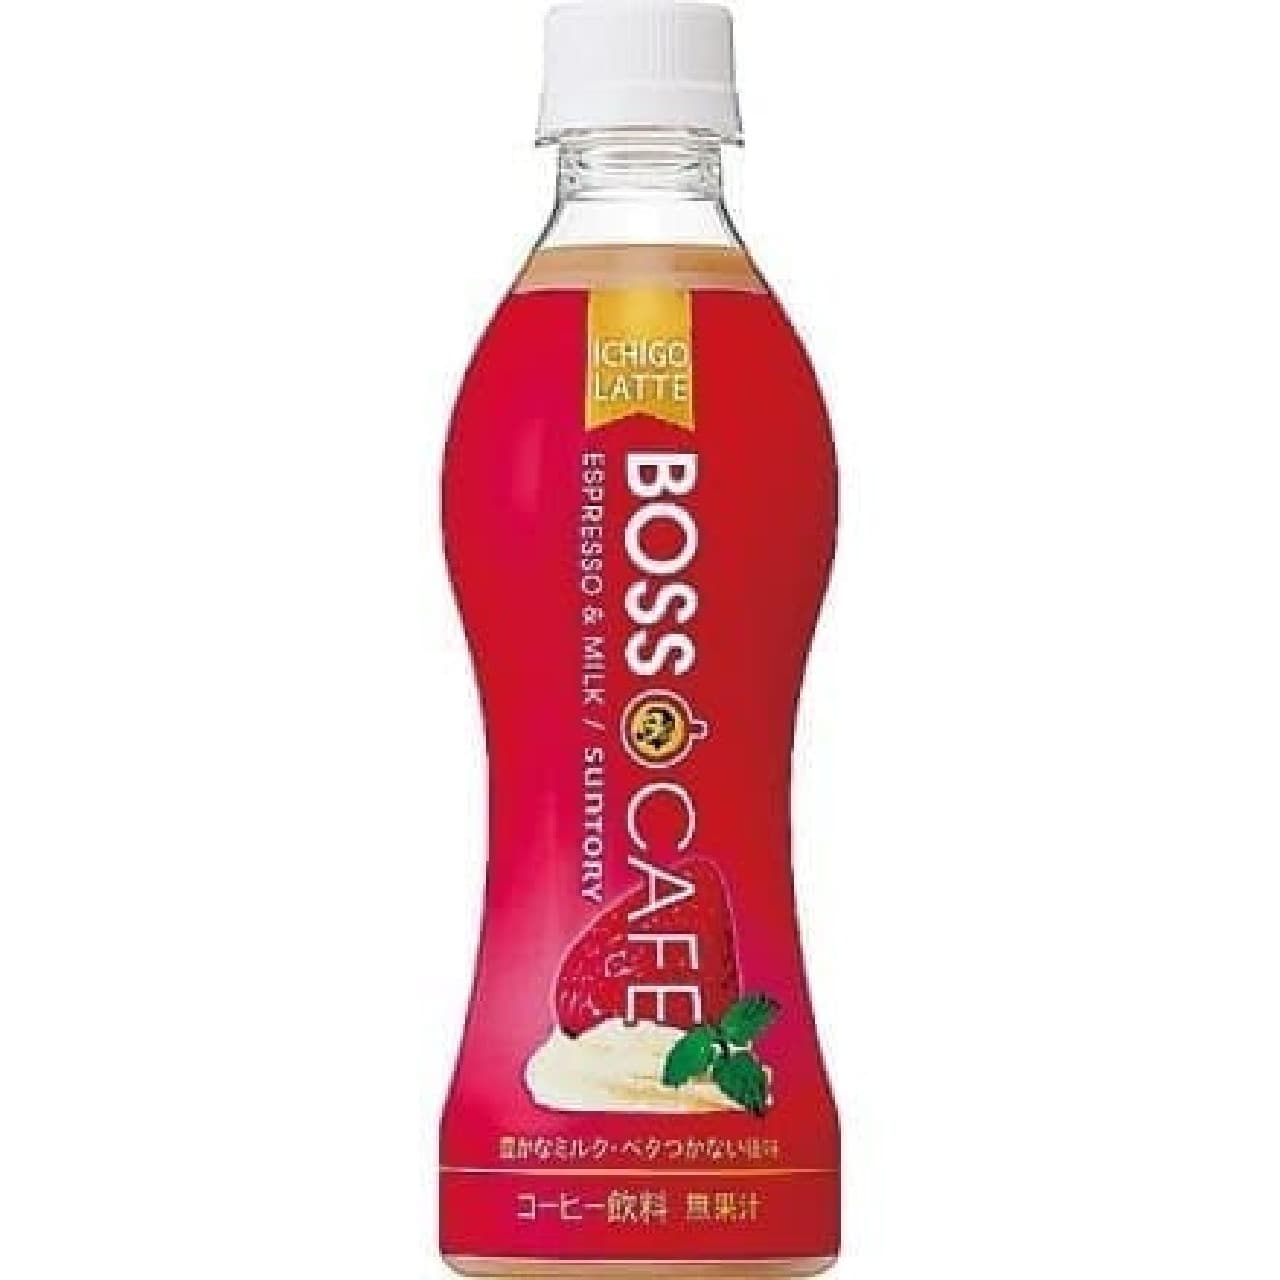 New release of bright red bottle "Strawberry Latte" at Boss Cafe